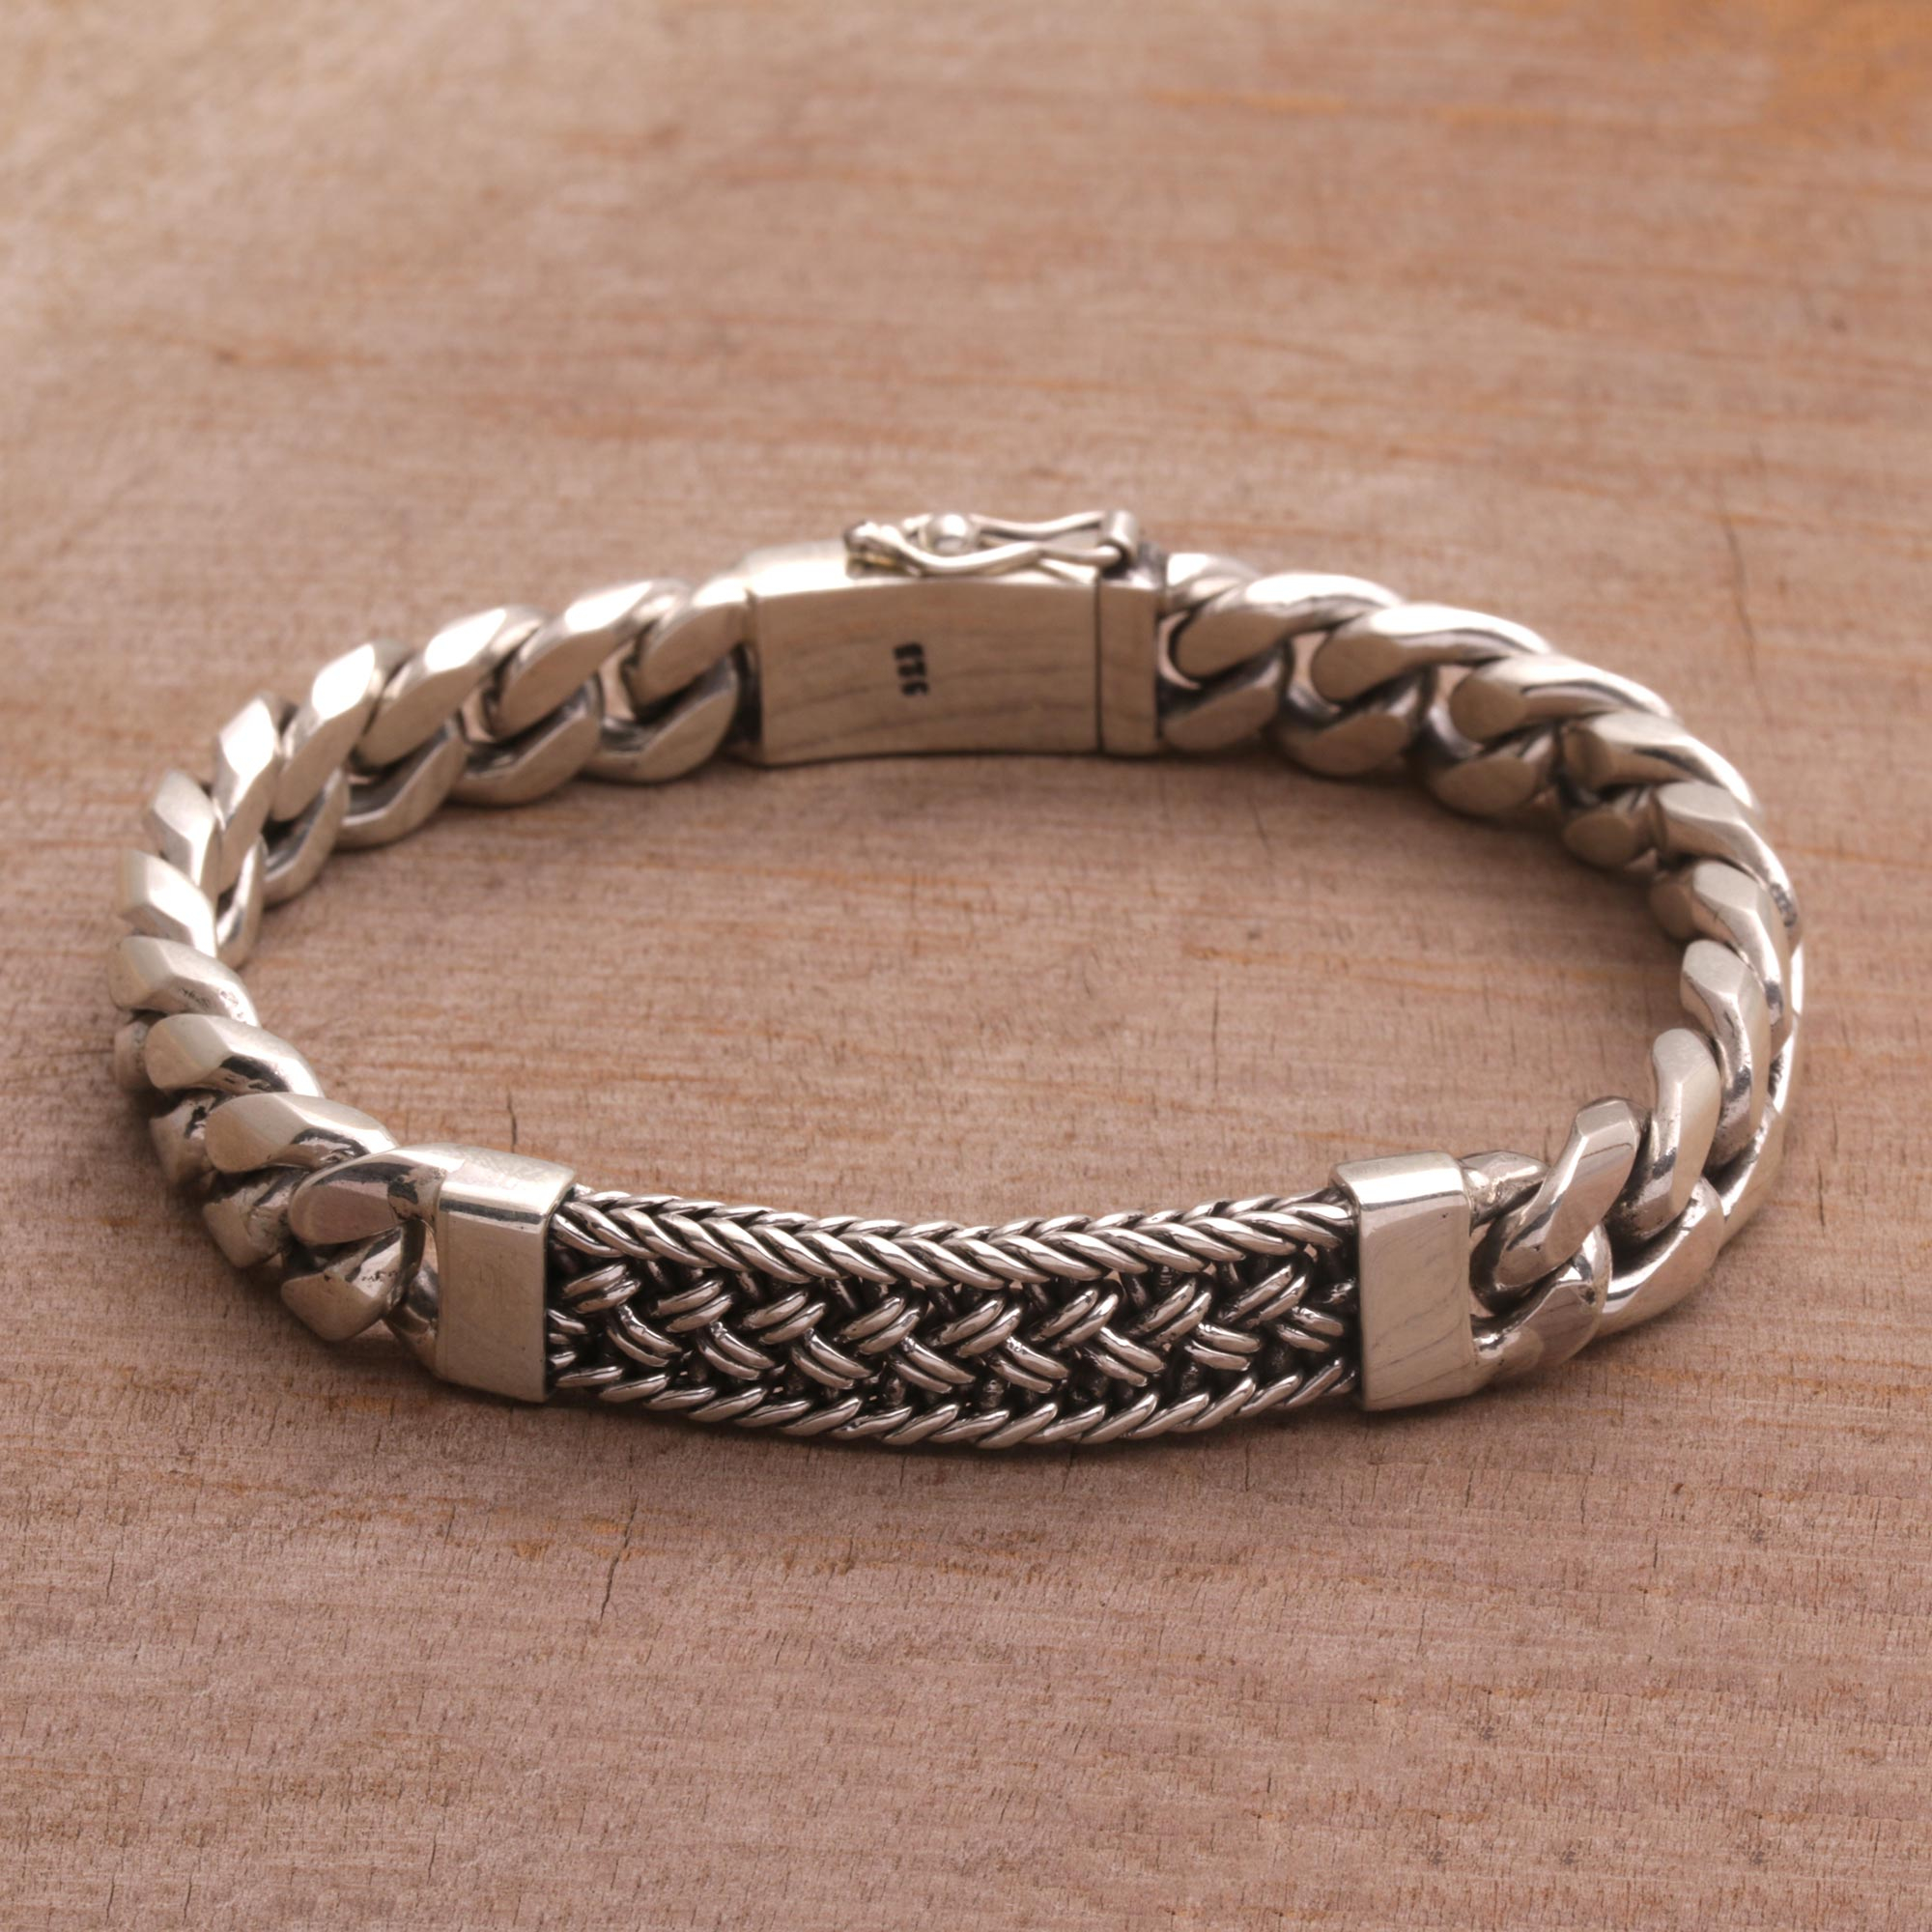 Sterling Silver Braided Wristband Bracelet from Bali - Distinctive Style